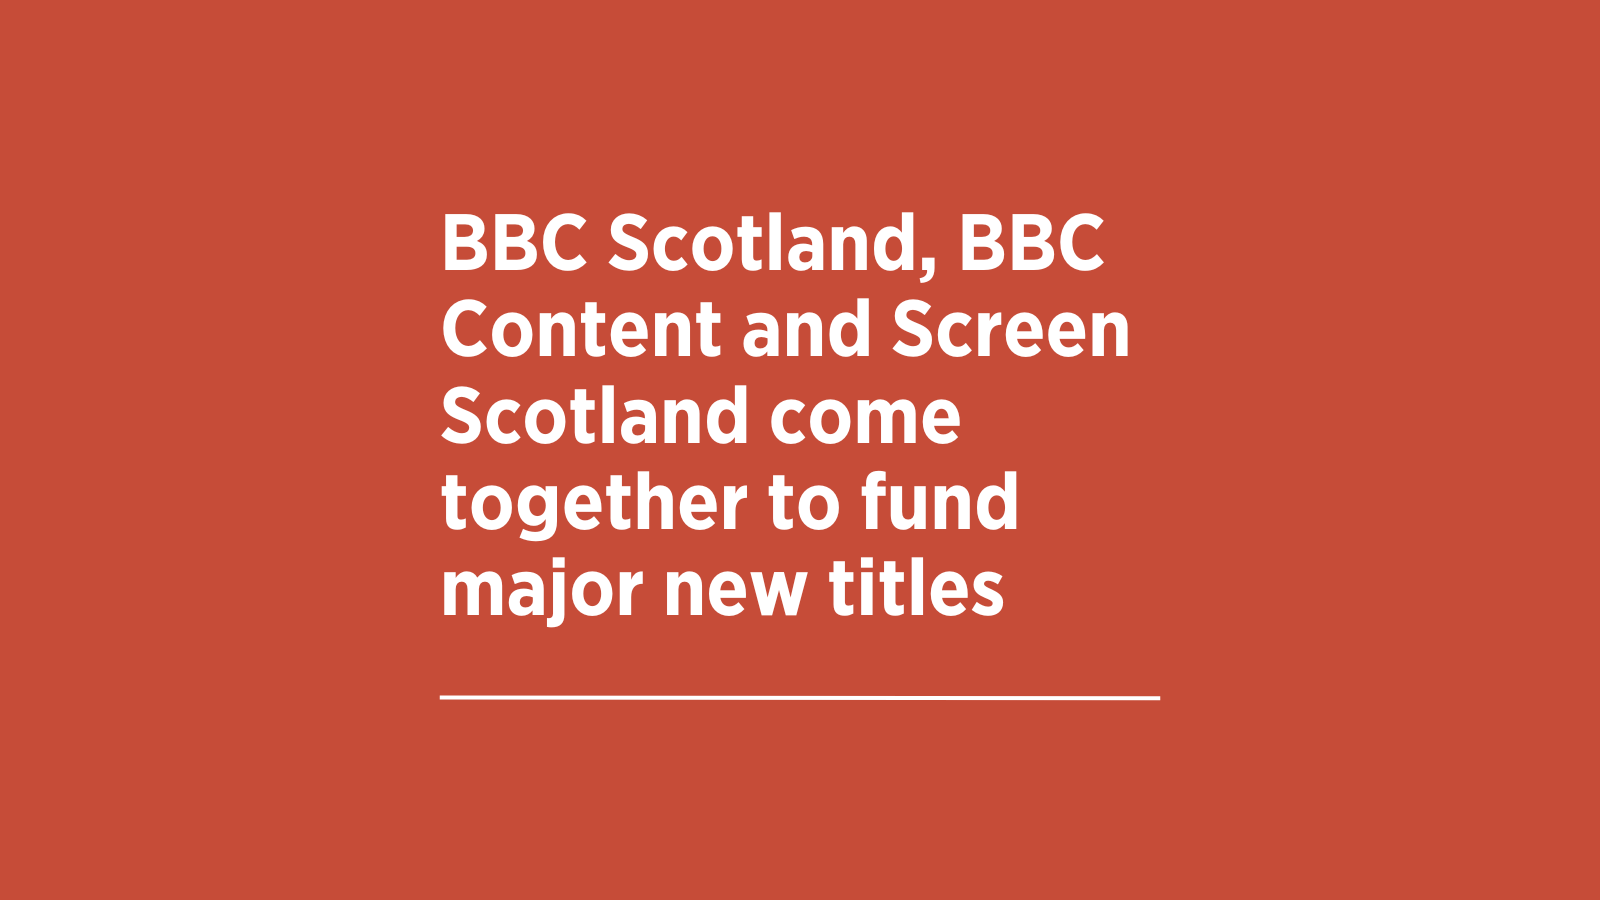 BBC Scotland, BBC Content and Screen Scotland come together to fund major new titles